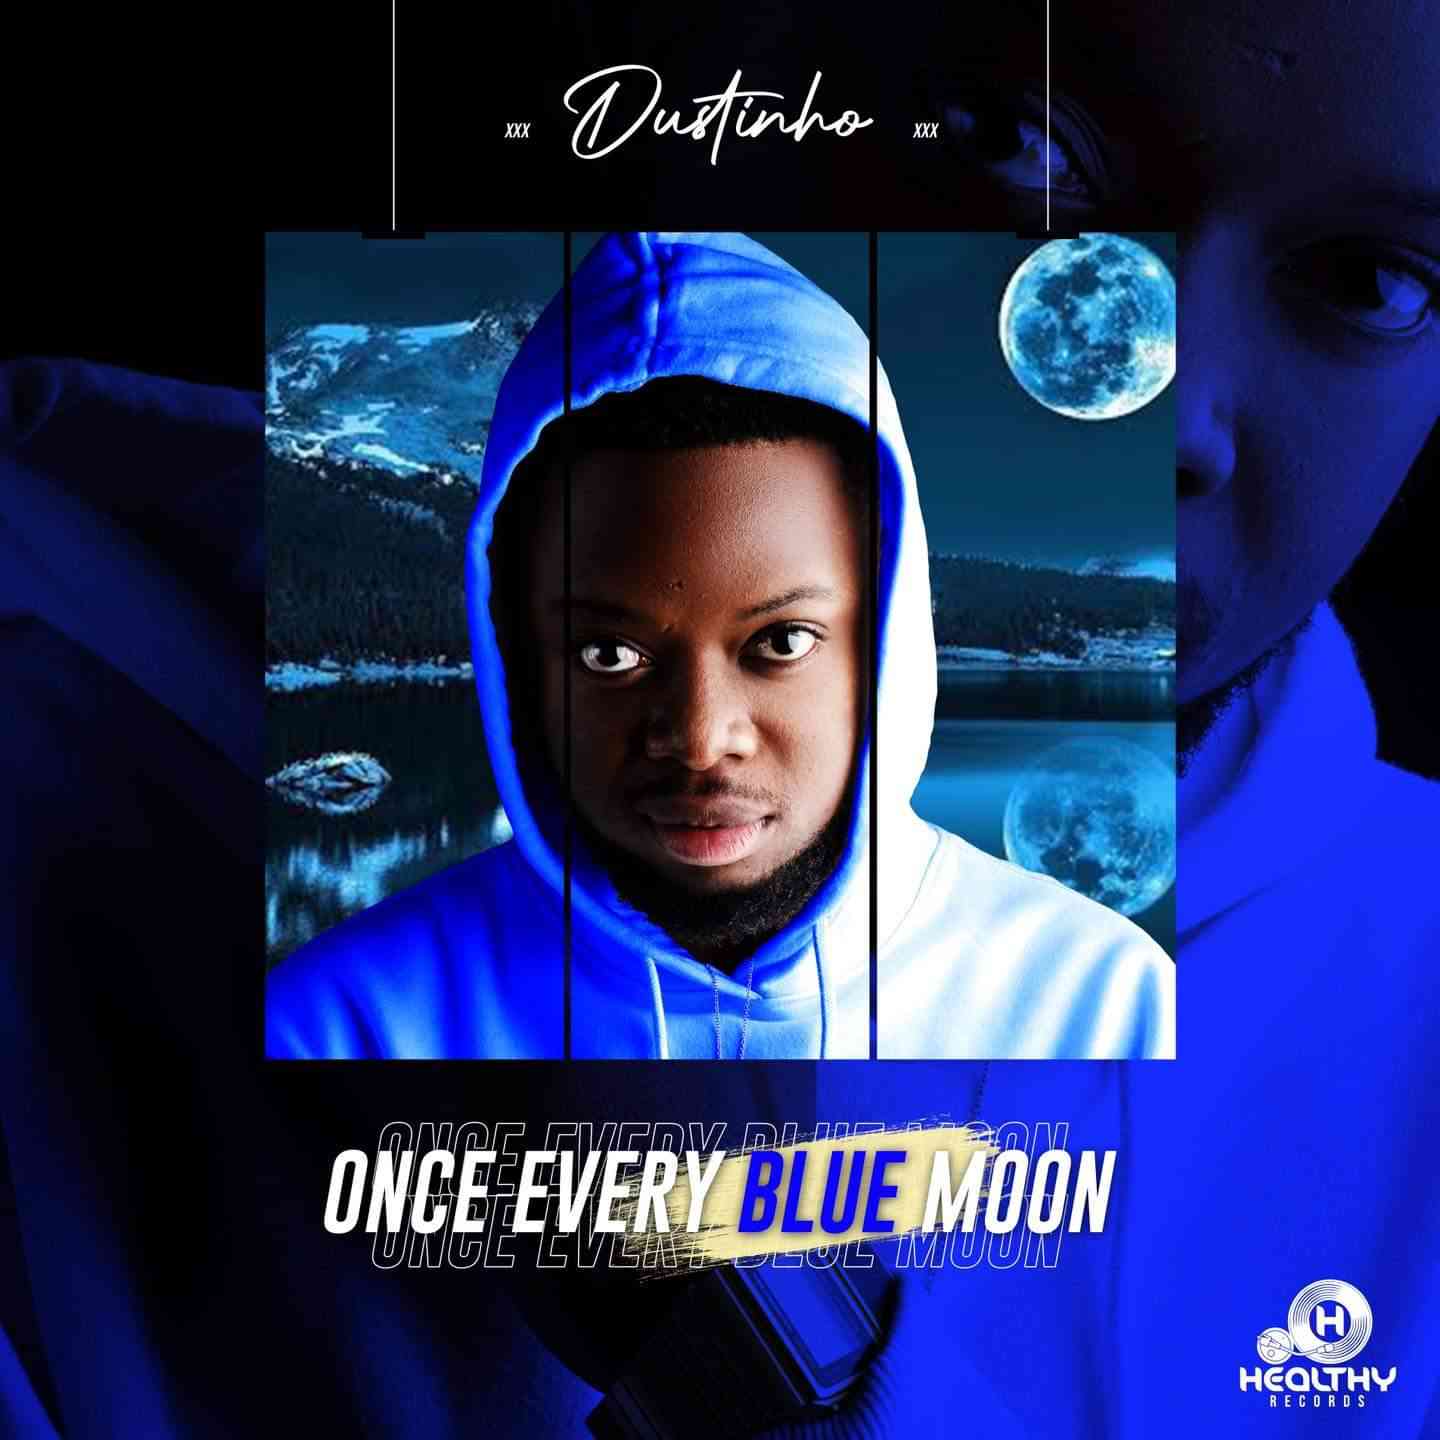 Dustinho Shines With Once Every Blue Moon Album